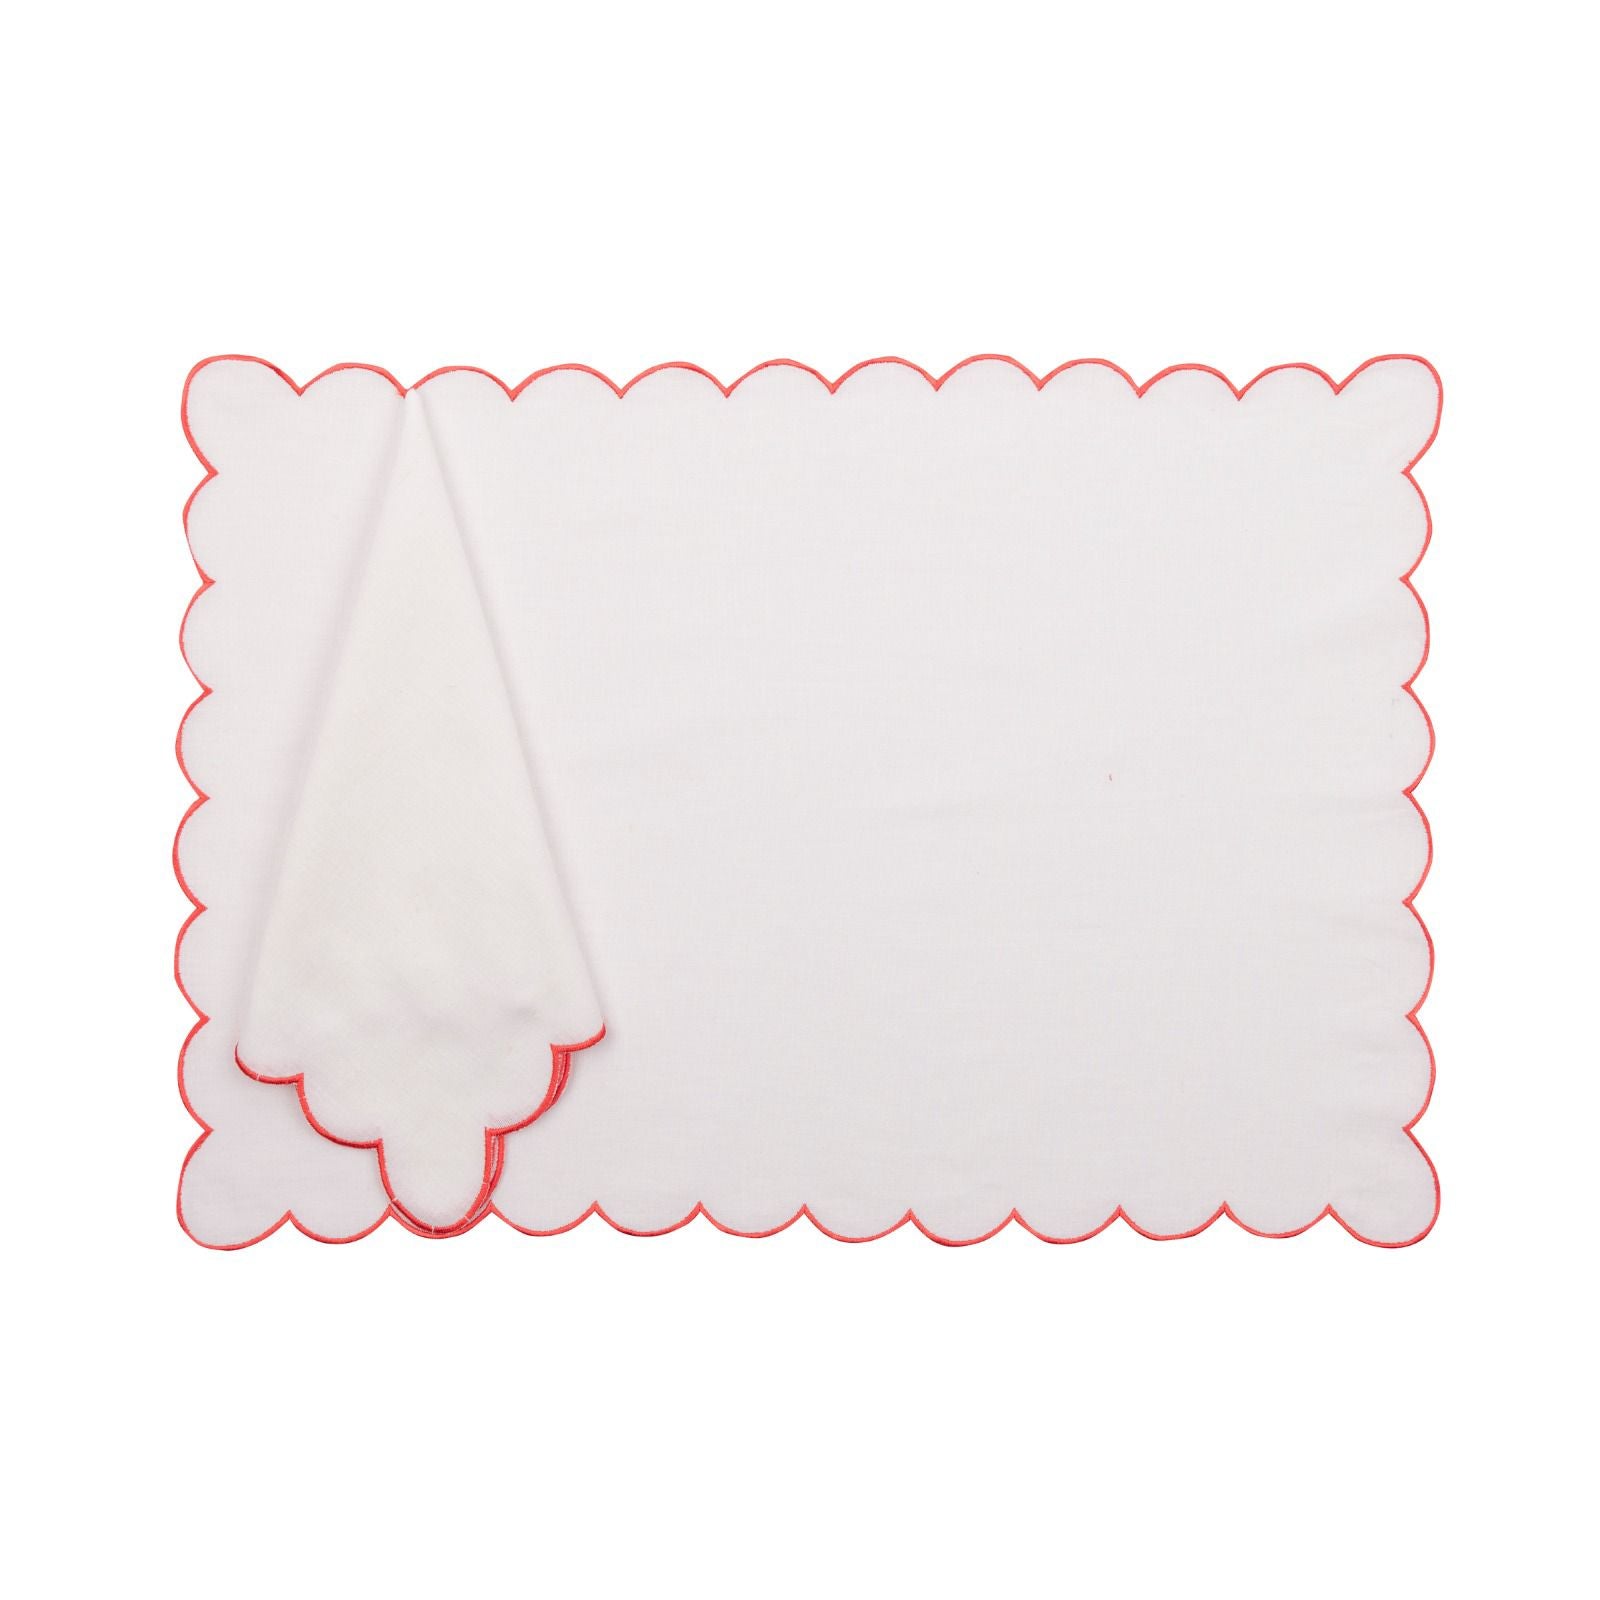 Scalloped Mat And Napkin (Set Of 6) - Sohni Scalloped Red